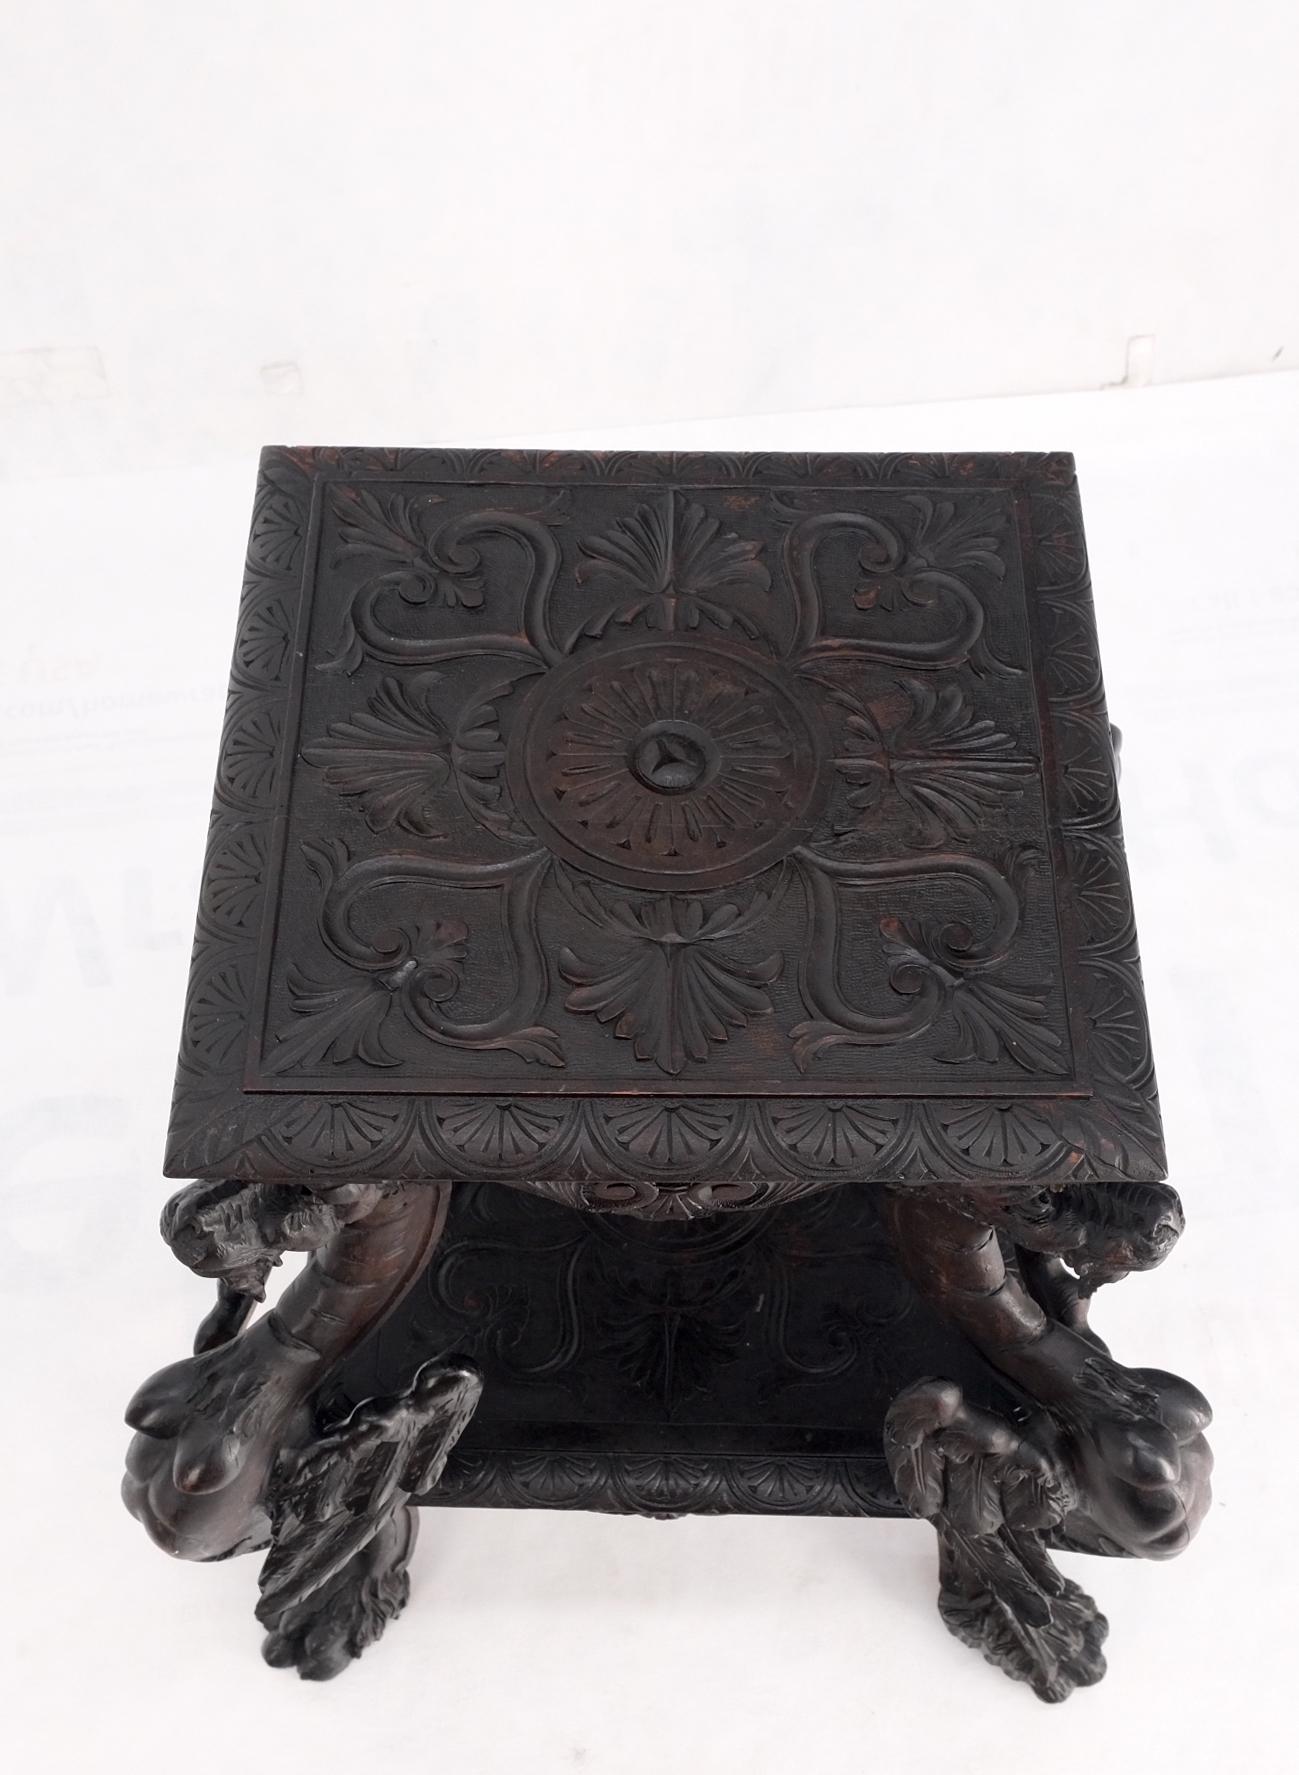 Heavily Carved Japanese Asian Dragon Motive Heavily Carved Two Tier Stand Table  4